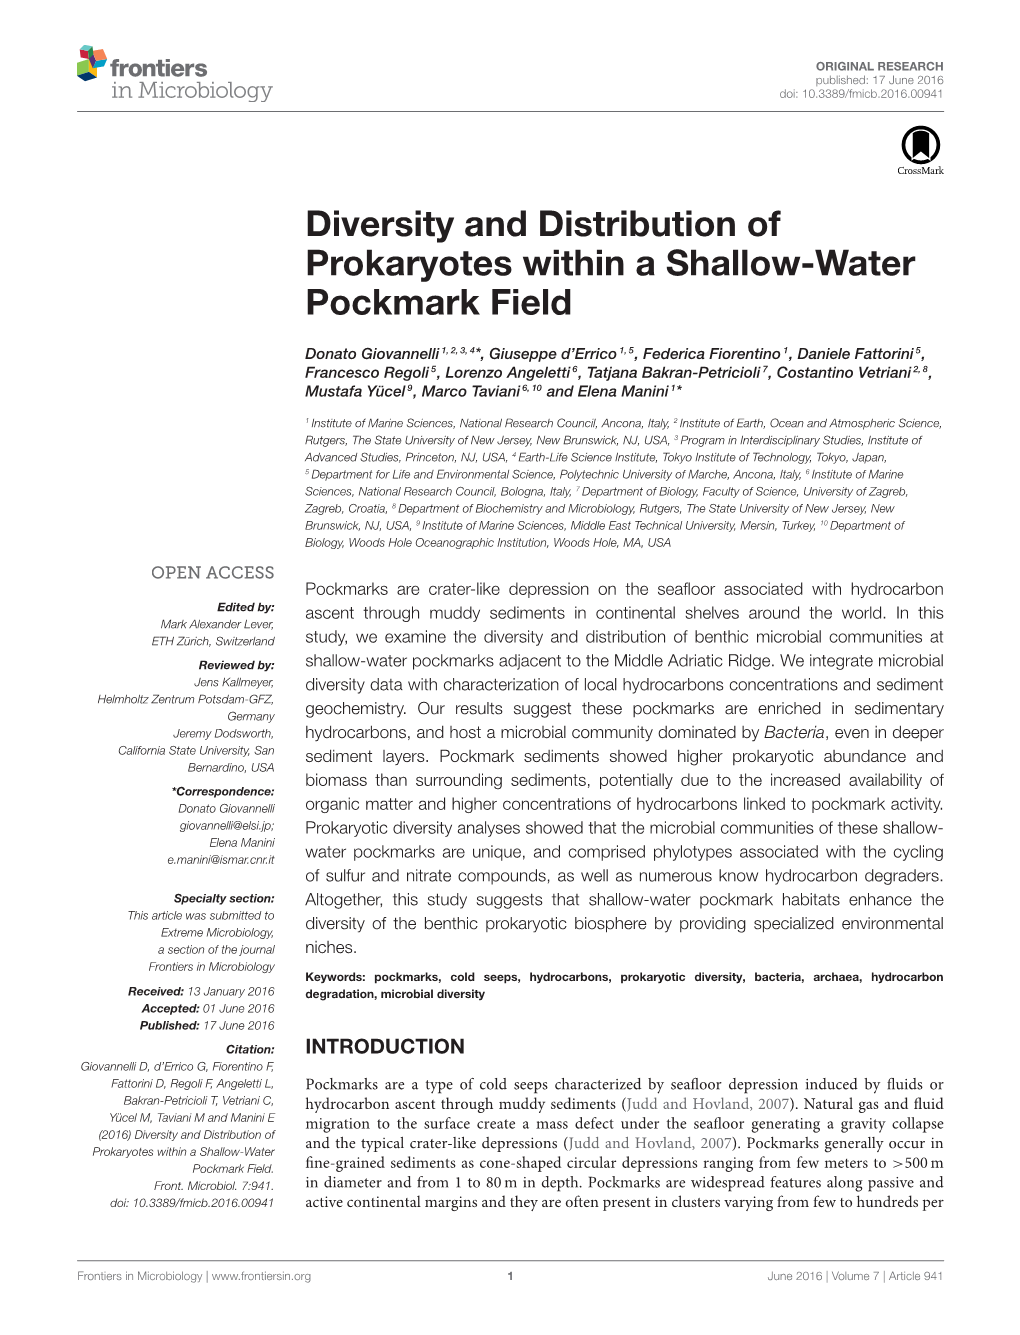 Diversity and Distribution of Prokaryotes Within a Shallow-Water Pockmark Field